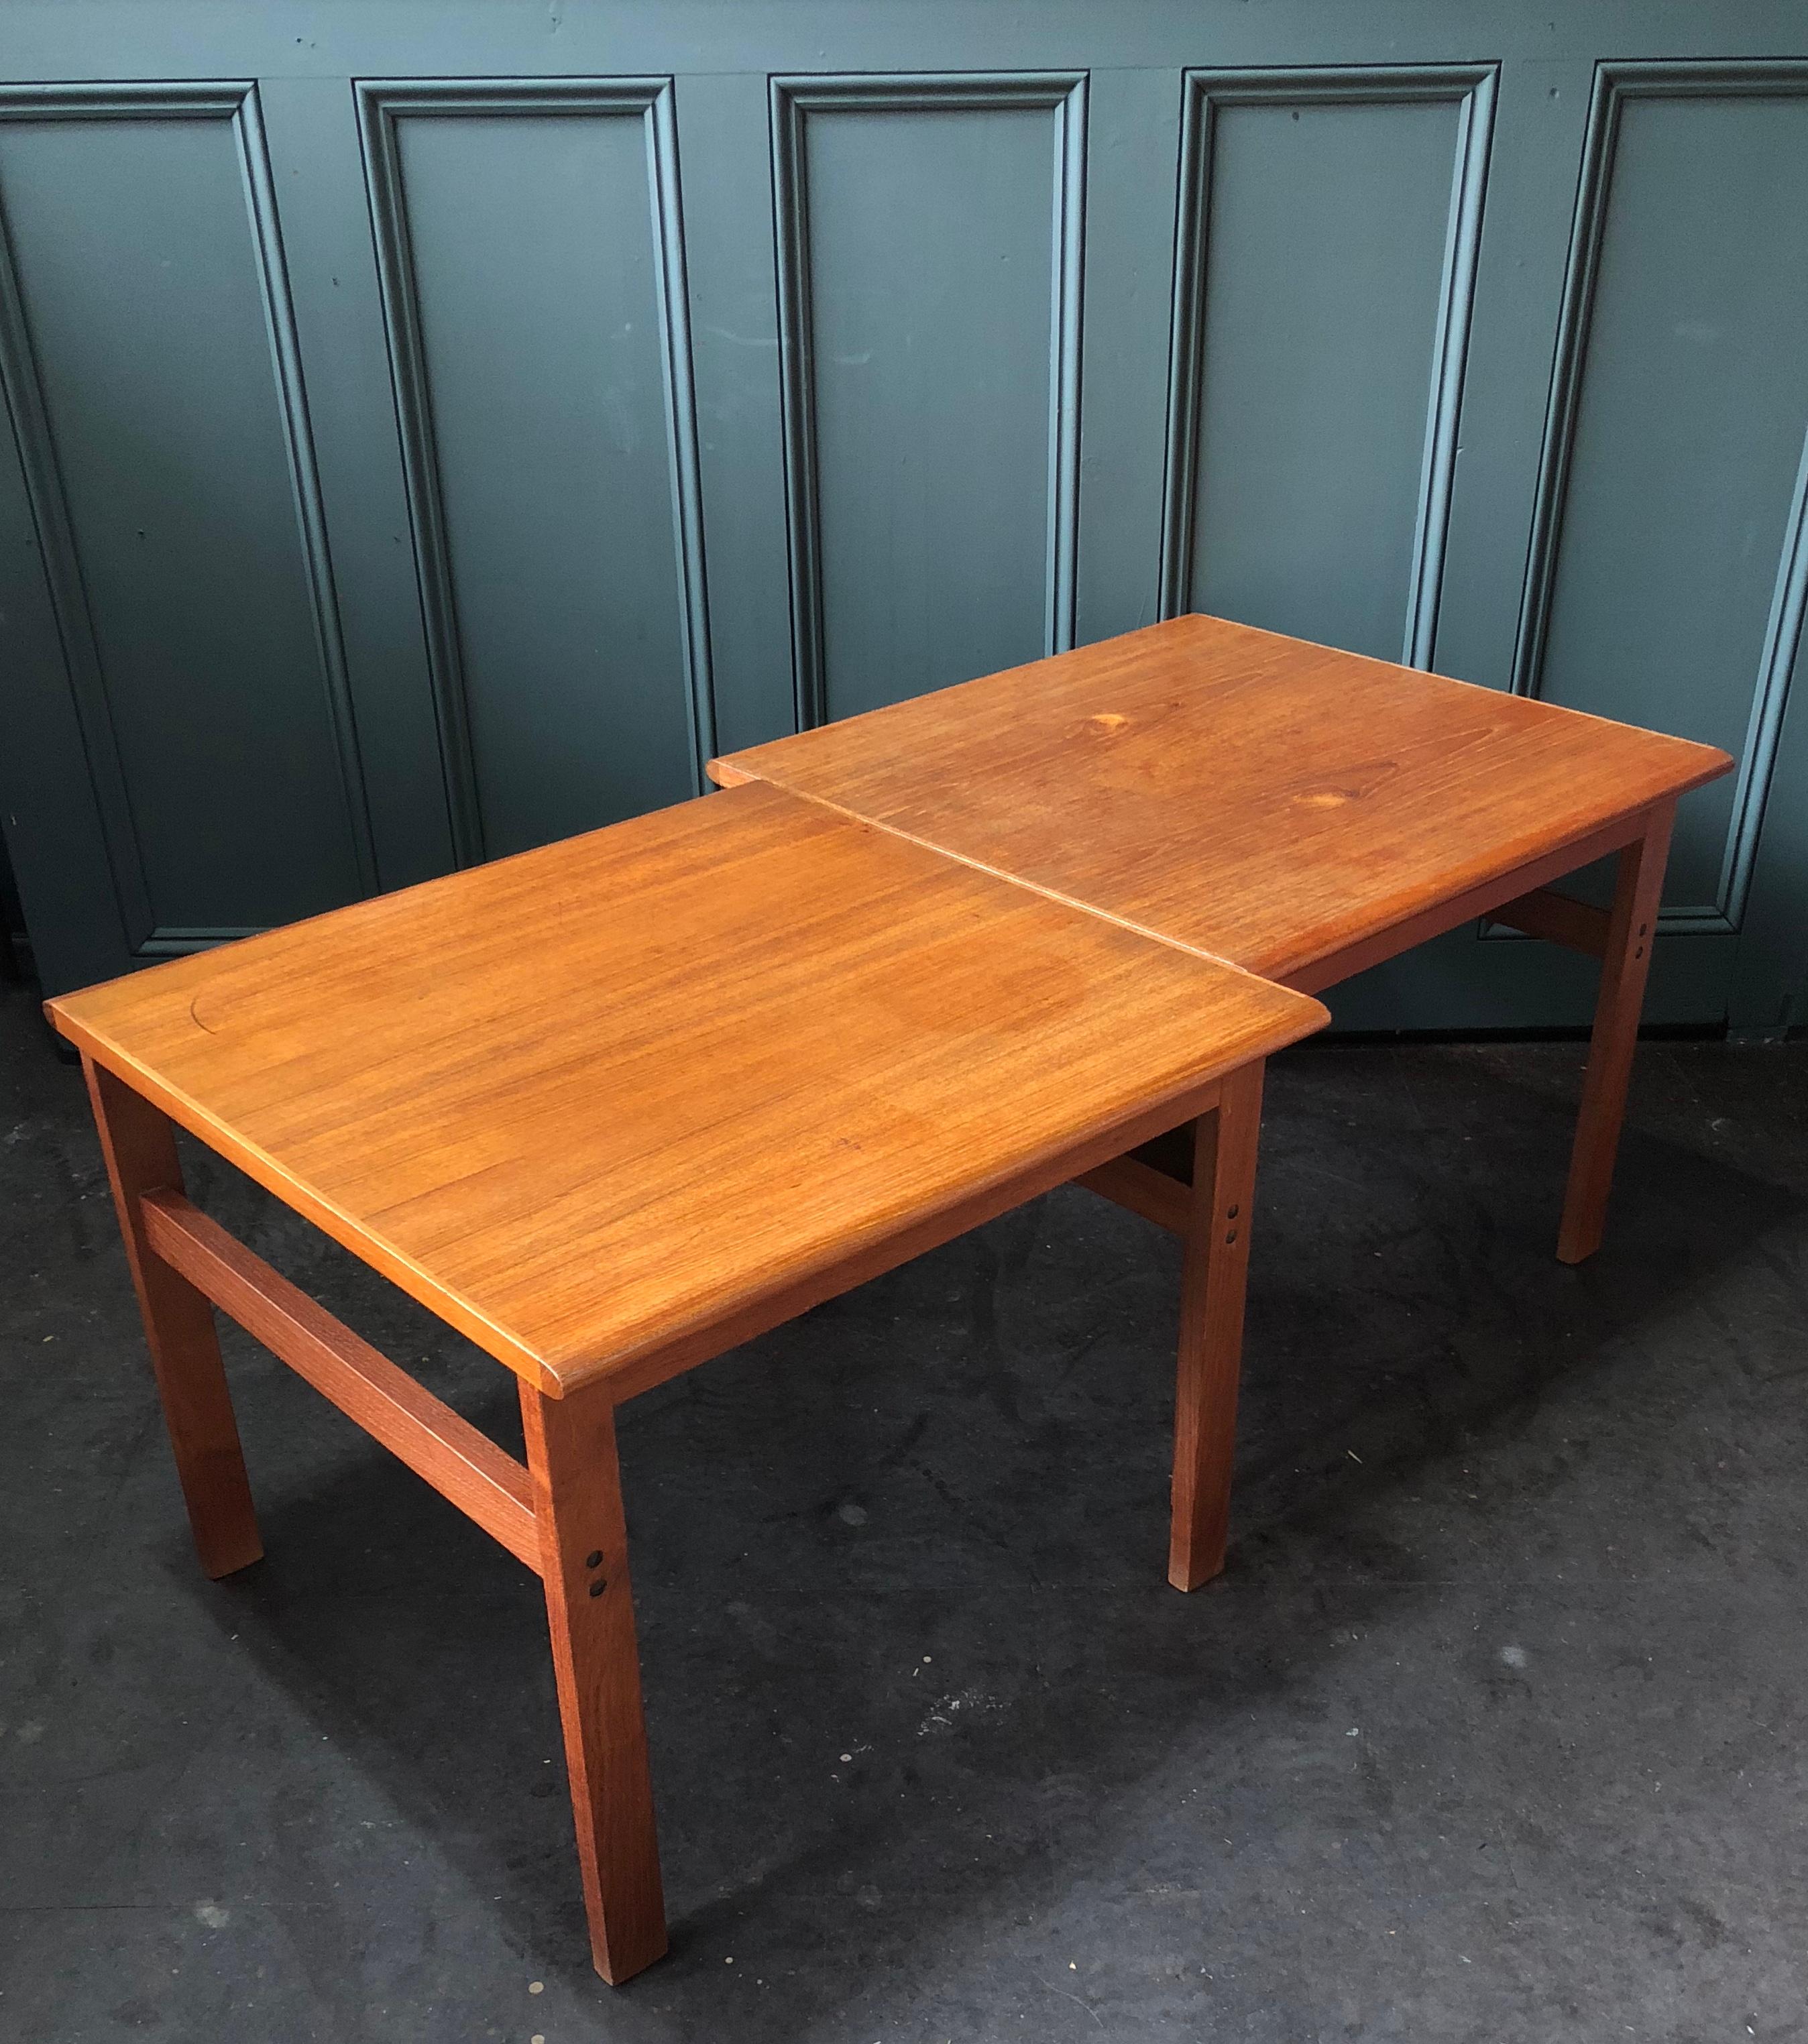 A pair of ‘Capella’ design teak coffee tables by Illum Wikkelsø. Manufactured by N. Eilersen, Denmark, 1960s. Easily dismantled (and assembled0 for safe shipping.